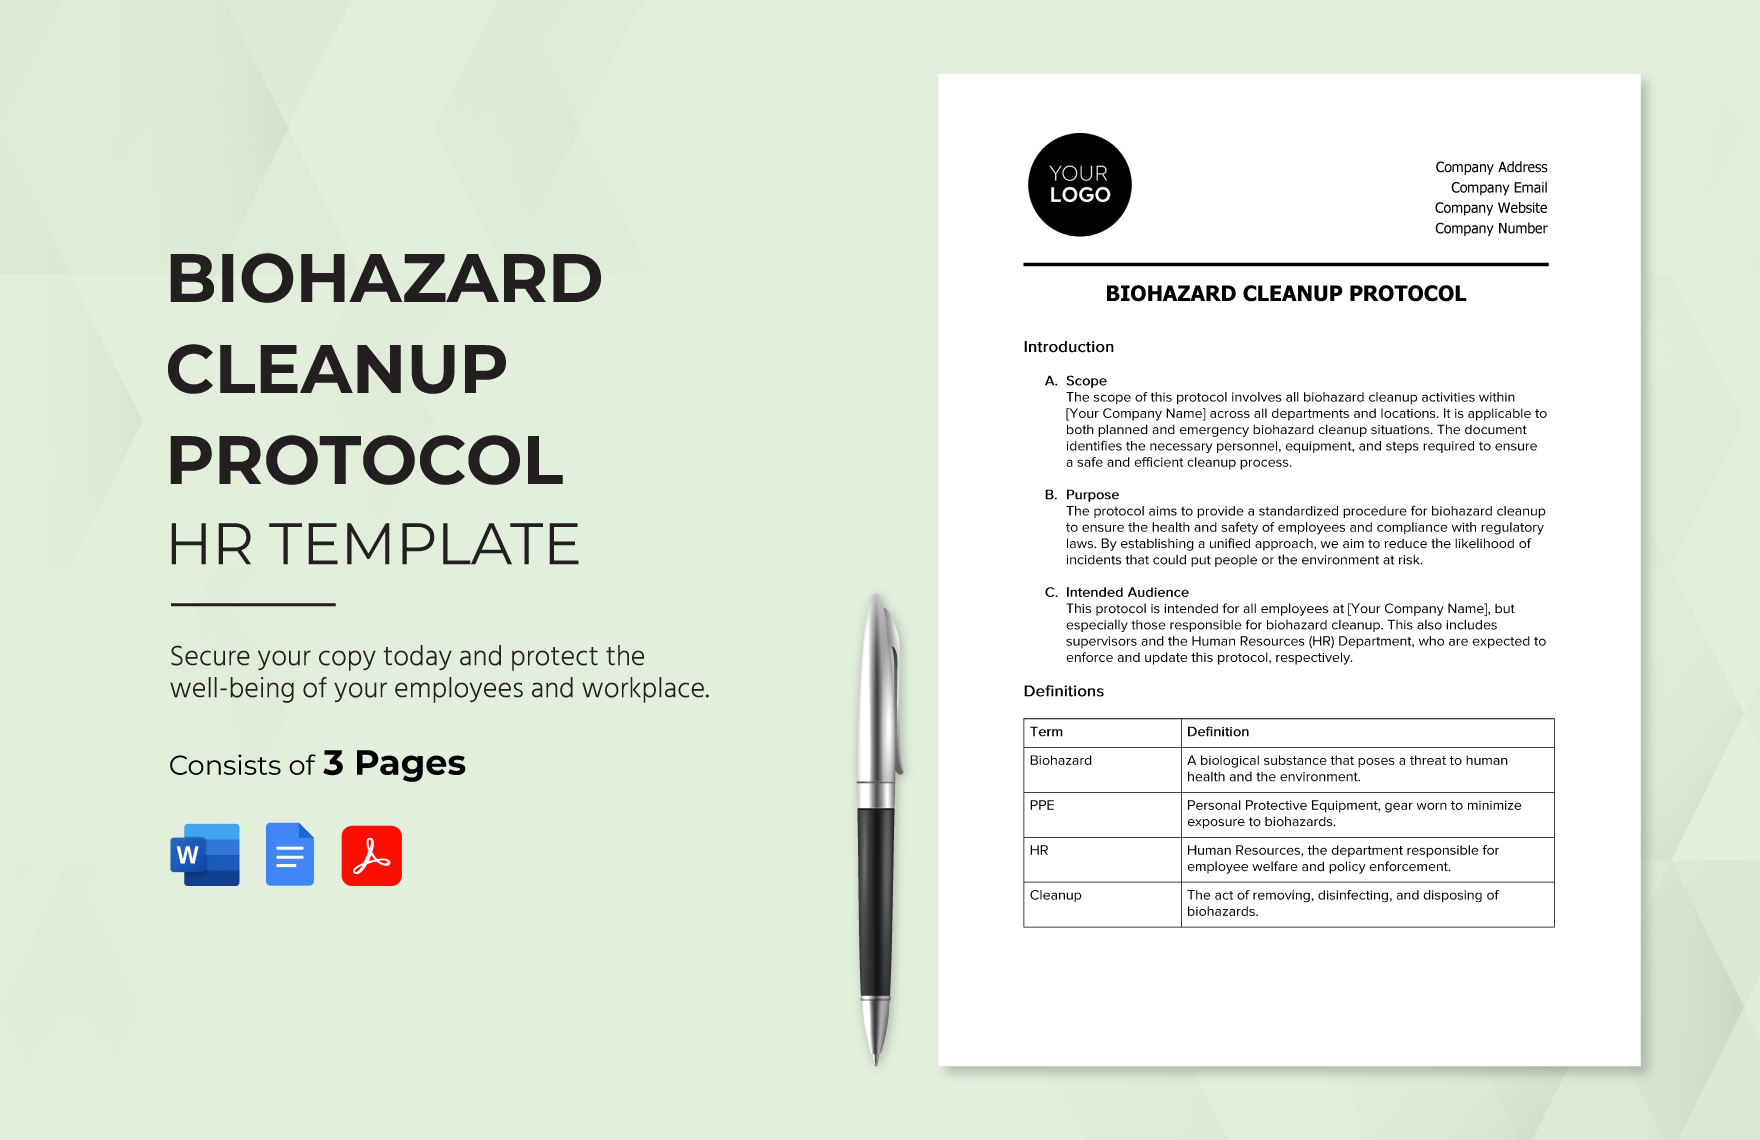 Biohazard Cleanup Protocol HR Template in Word, Google Docs, PDF